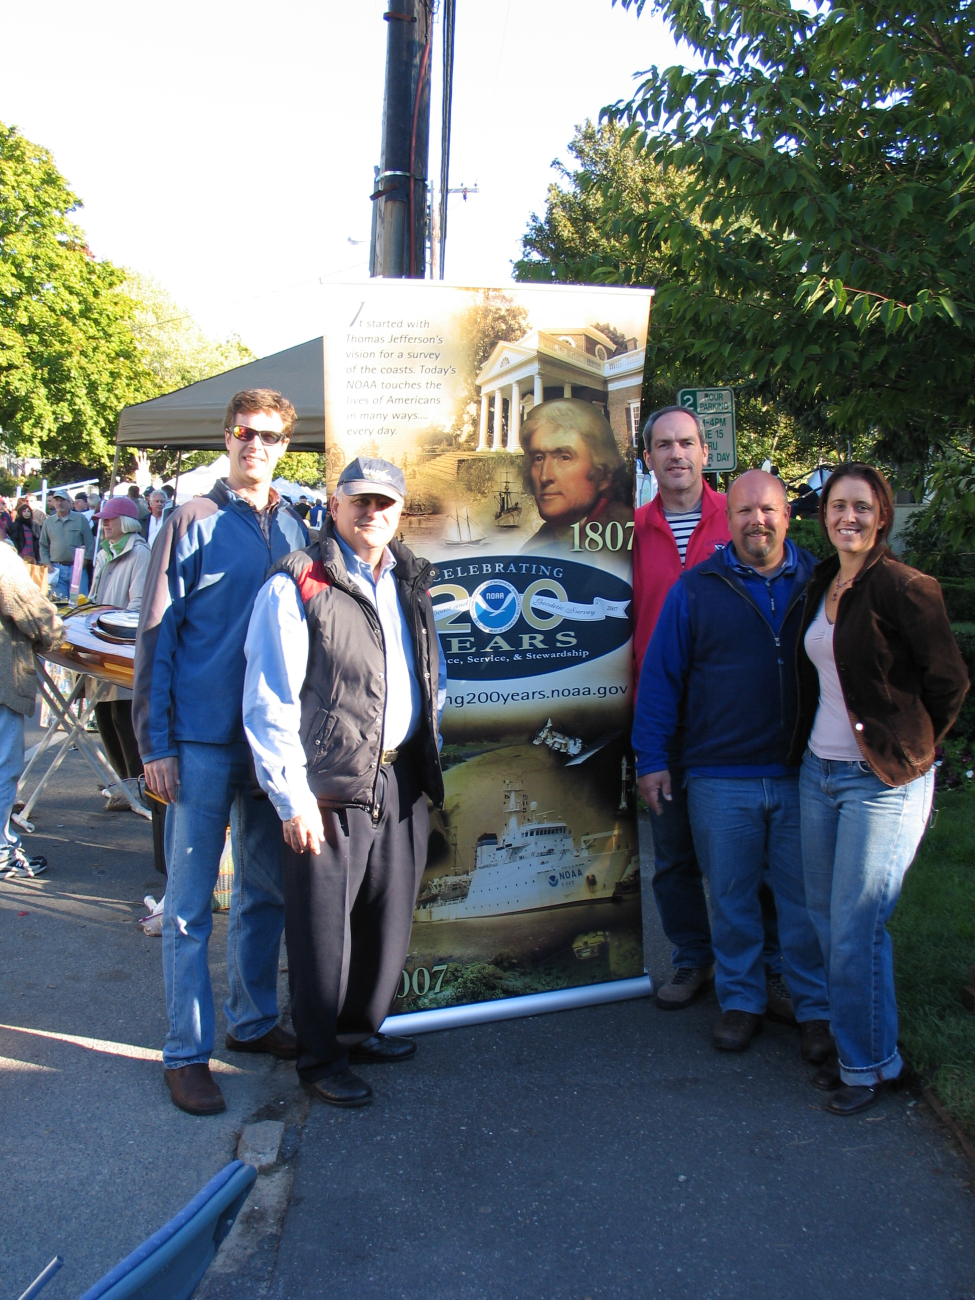 Greetings from Wellfleet, on Cape Cod Massachusetts! Employees from theNortheast Regional Office of the National Marine Fisheries Service along with HQ staff participated in the 7th Annual Wellfleet OysterFest in October